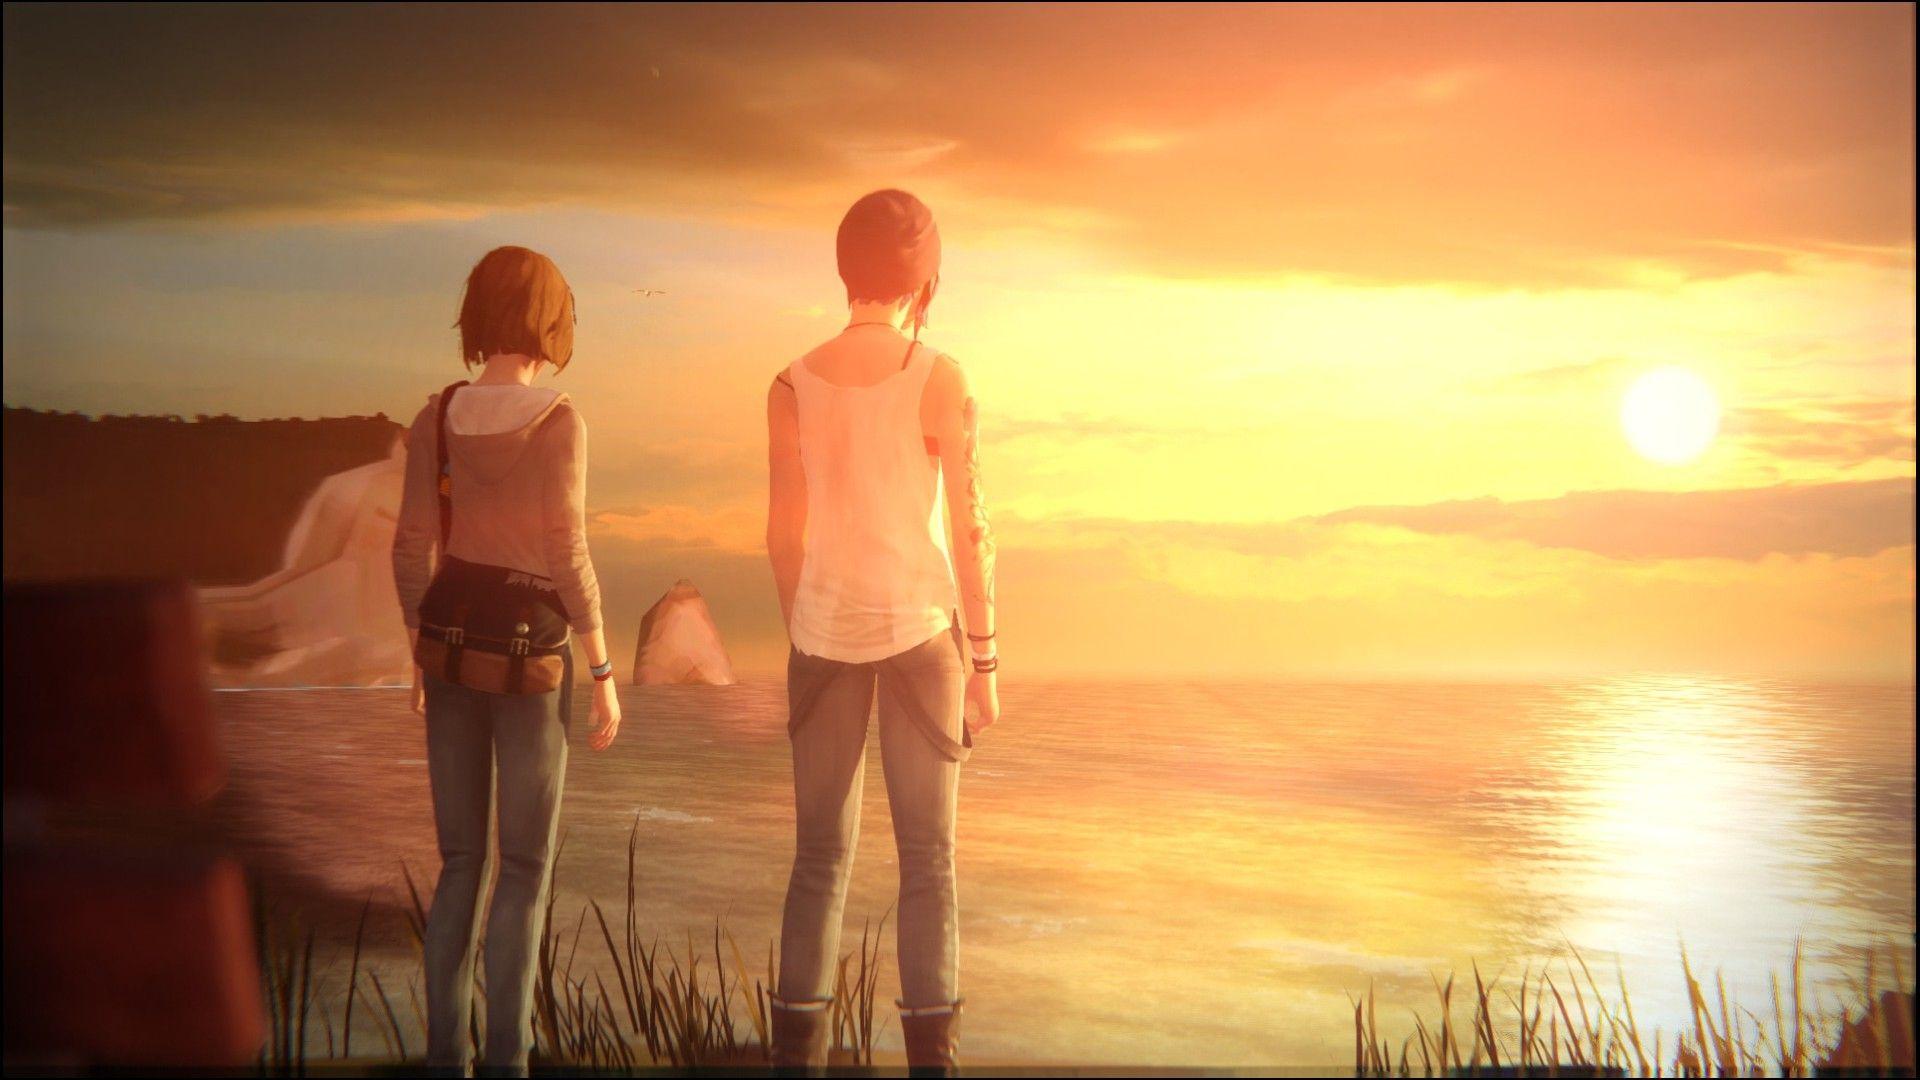 EP2 SPOILERS Life is Strange Wallpaper thread. Please post any